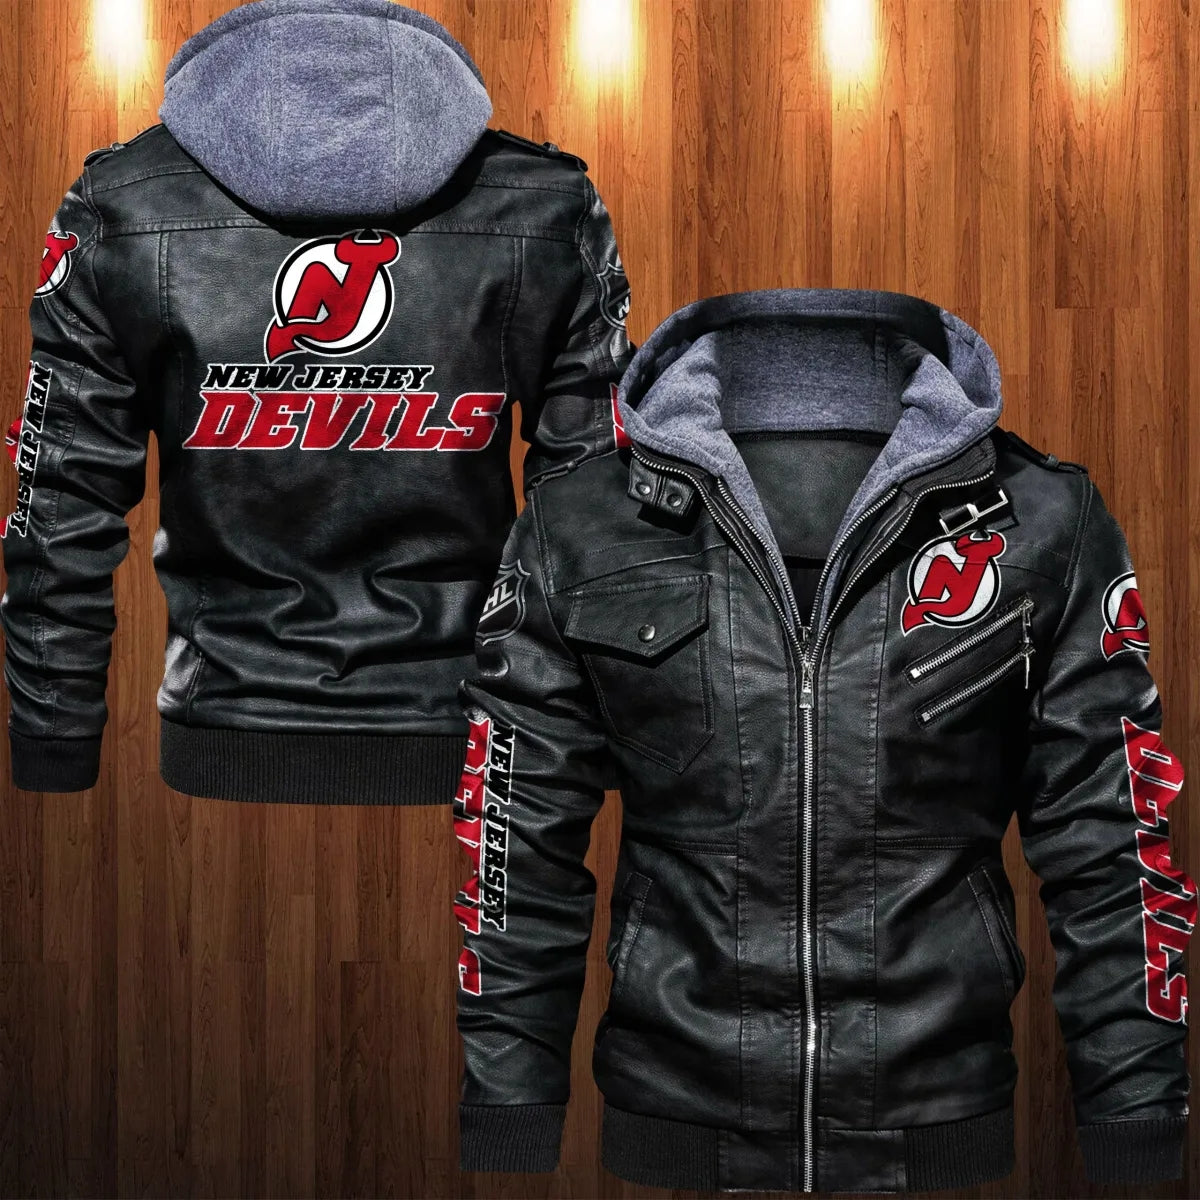 New Jersey Devils Two-Tone Wool and Leather Jacket - Black/White 2X-Large